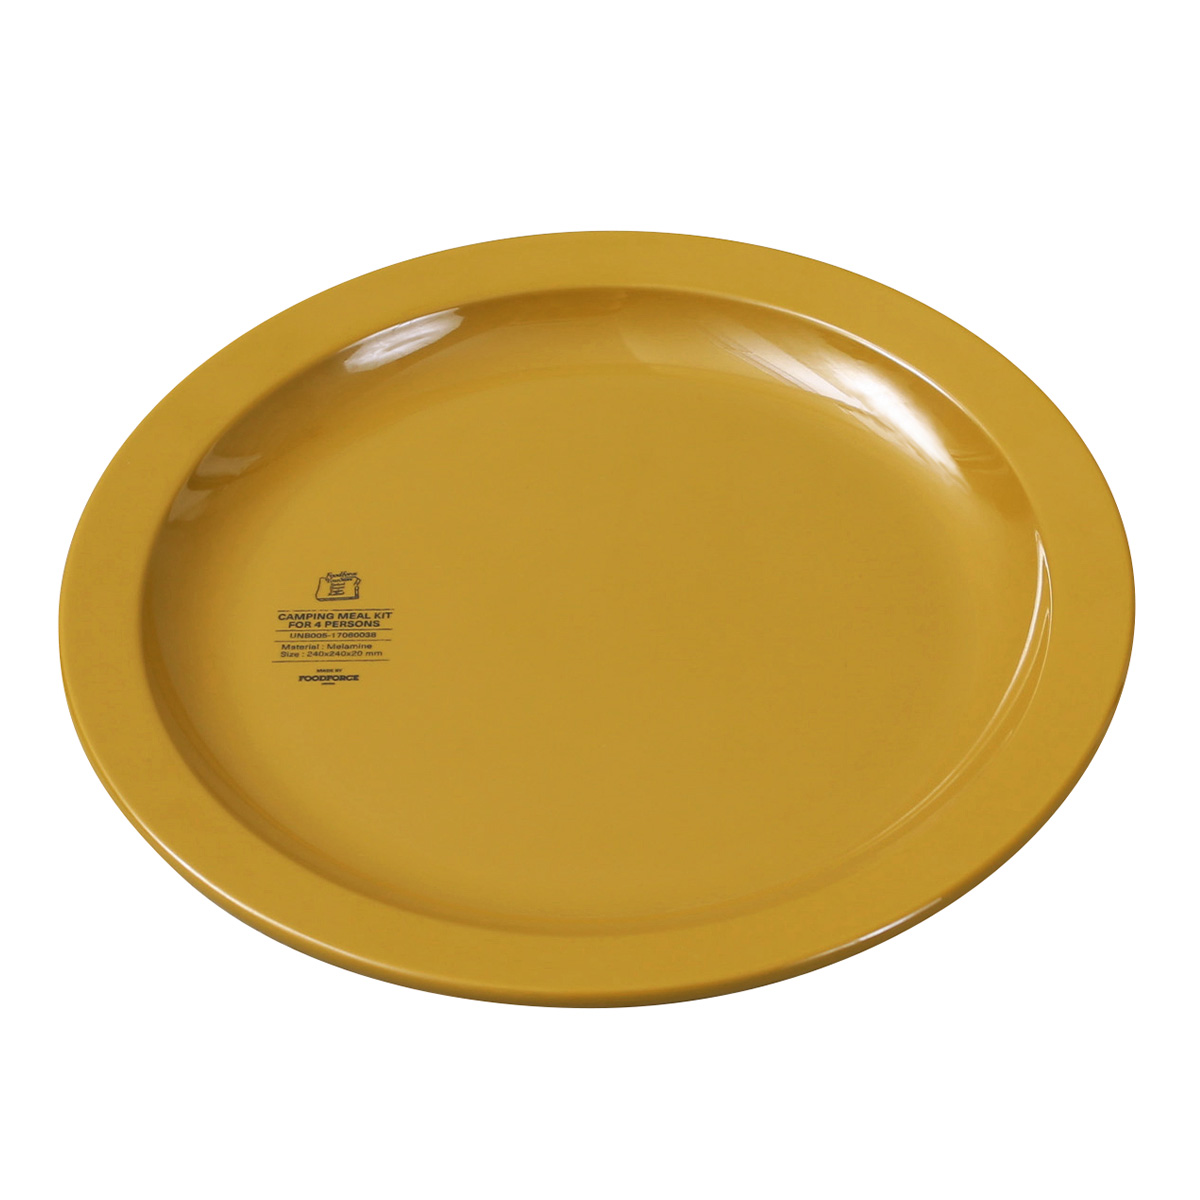 AS2OV 170600381 FOOD FORCE CAMPING MEAL PLATES プレー...